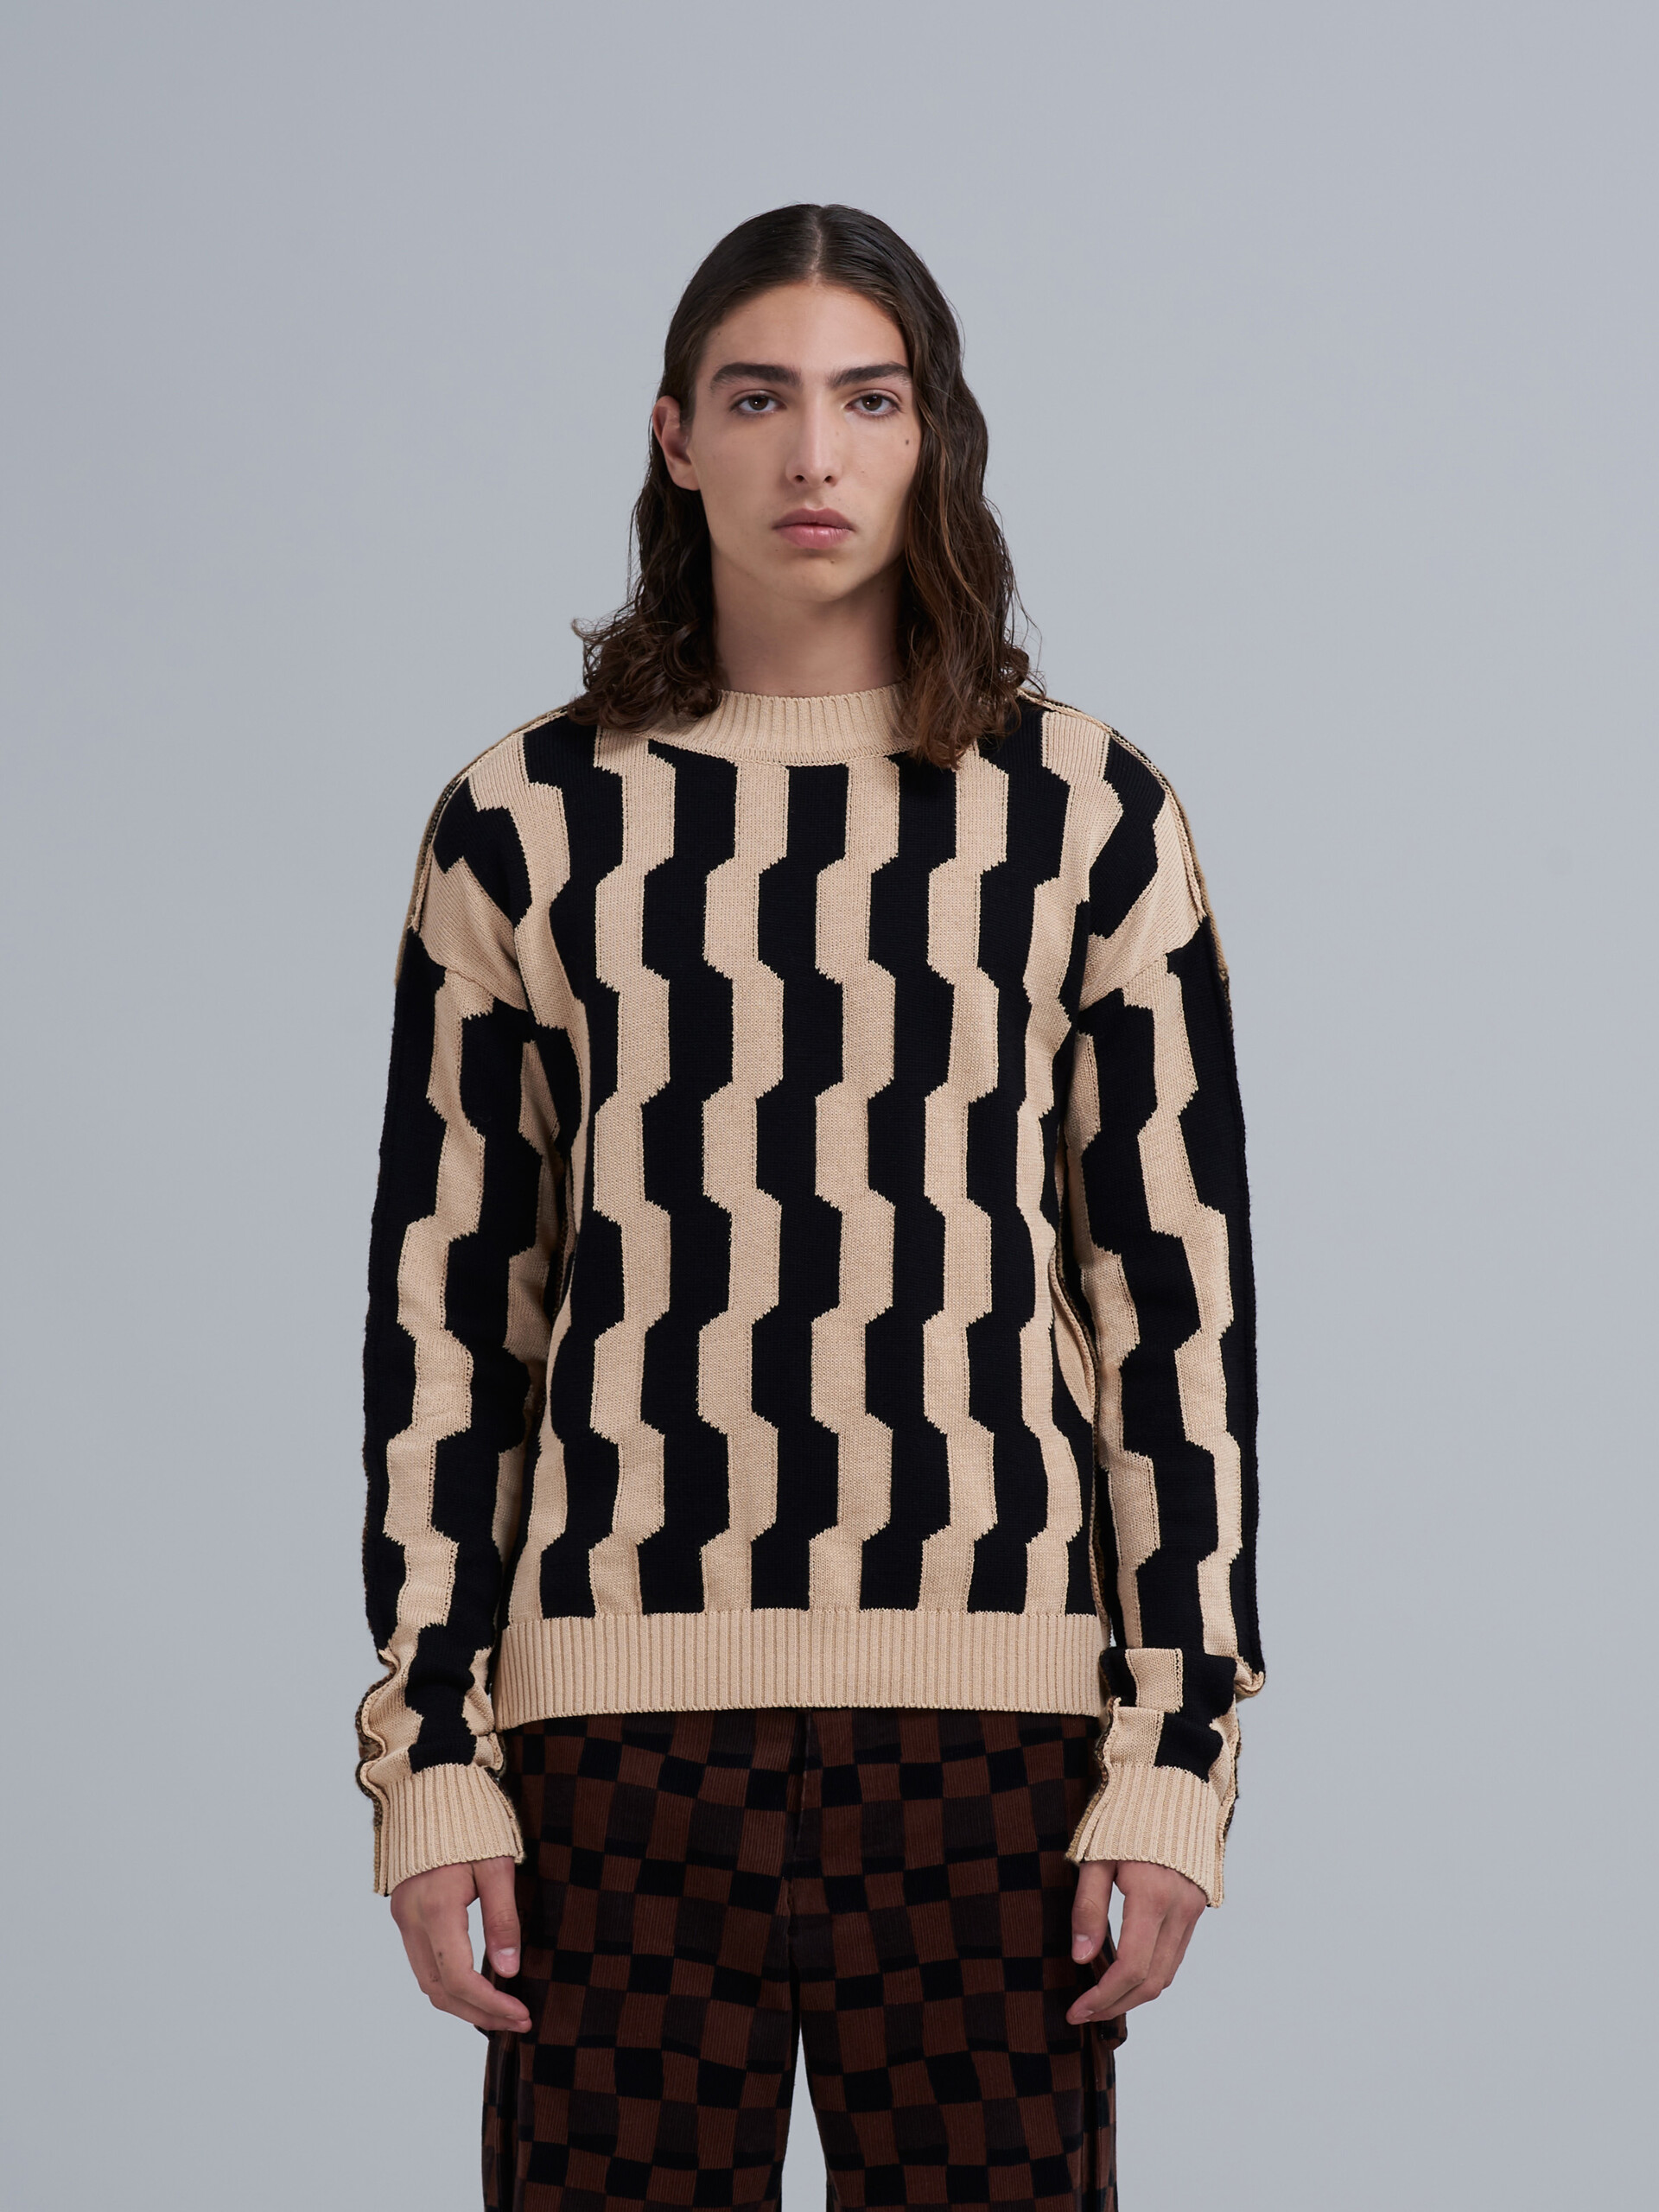 Beige and black crepe and Shetland wool sweater - Pullovers - Image 2